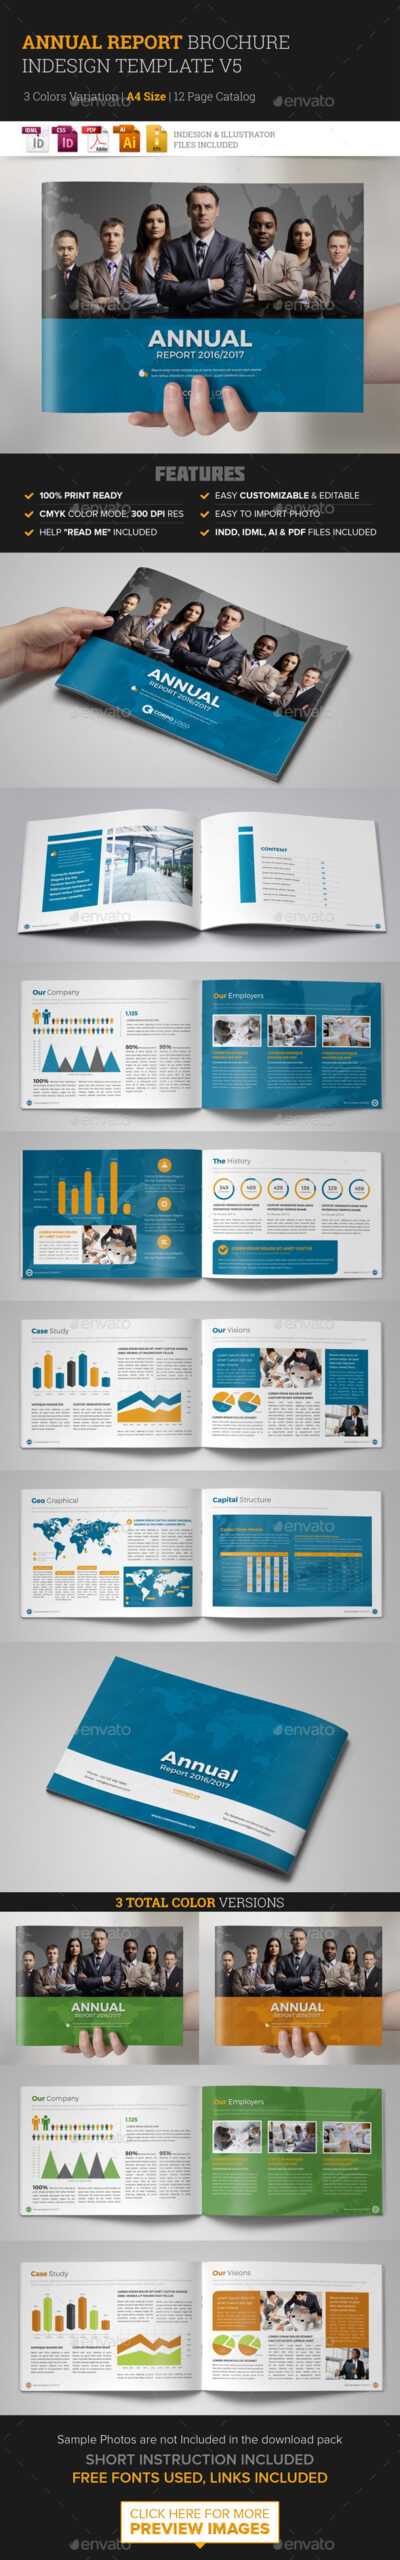 Annual Report Template Indesign Graphics, Designs & Templates Throughout Free Annual Report Template Indesign